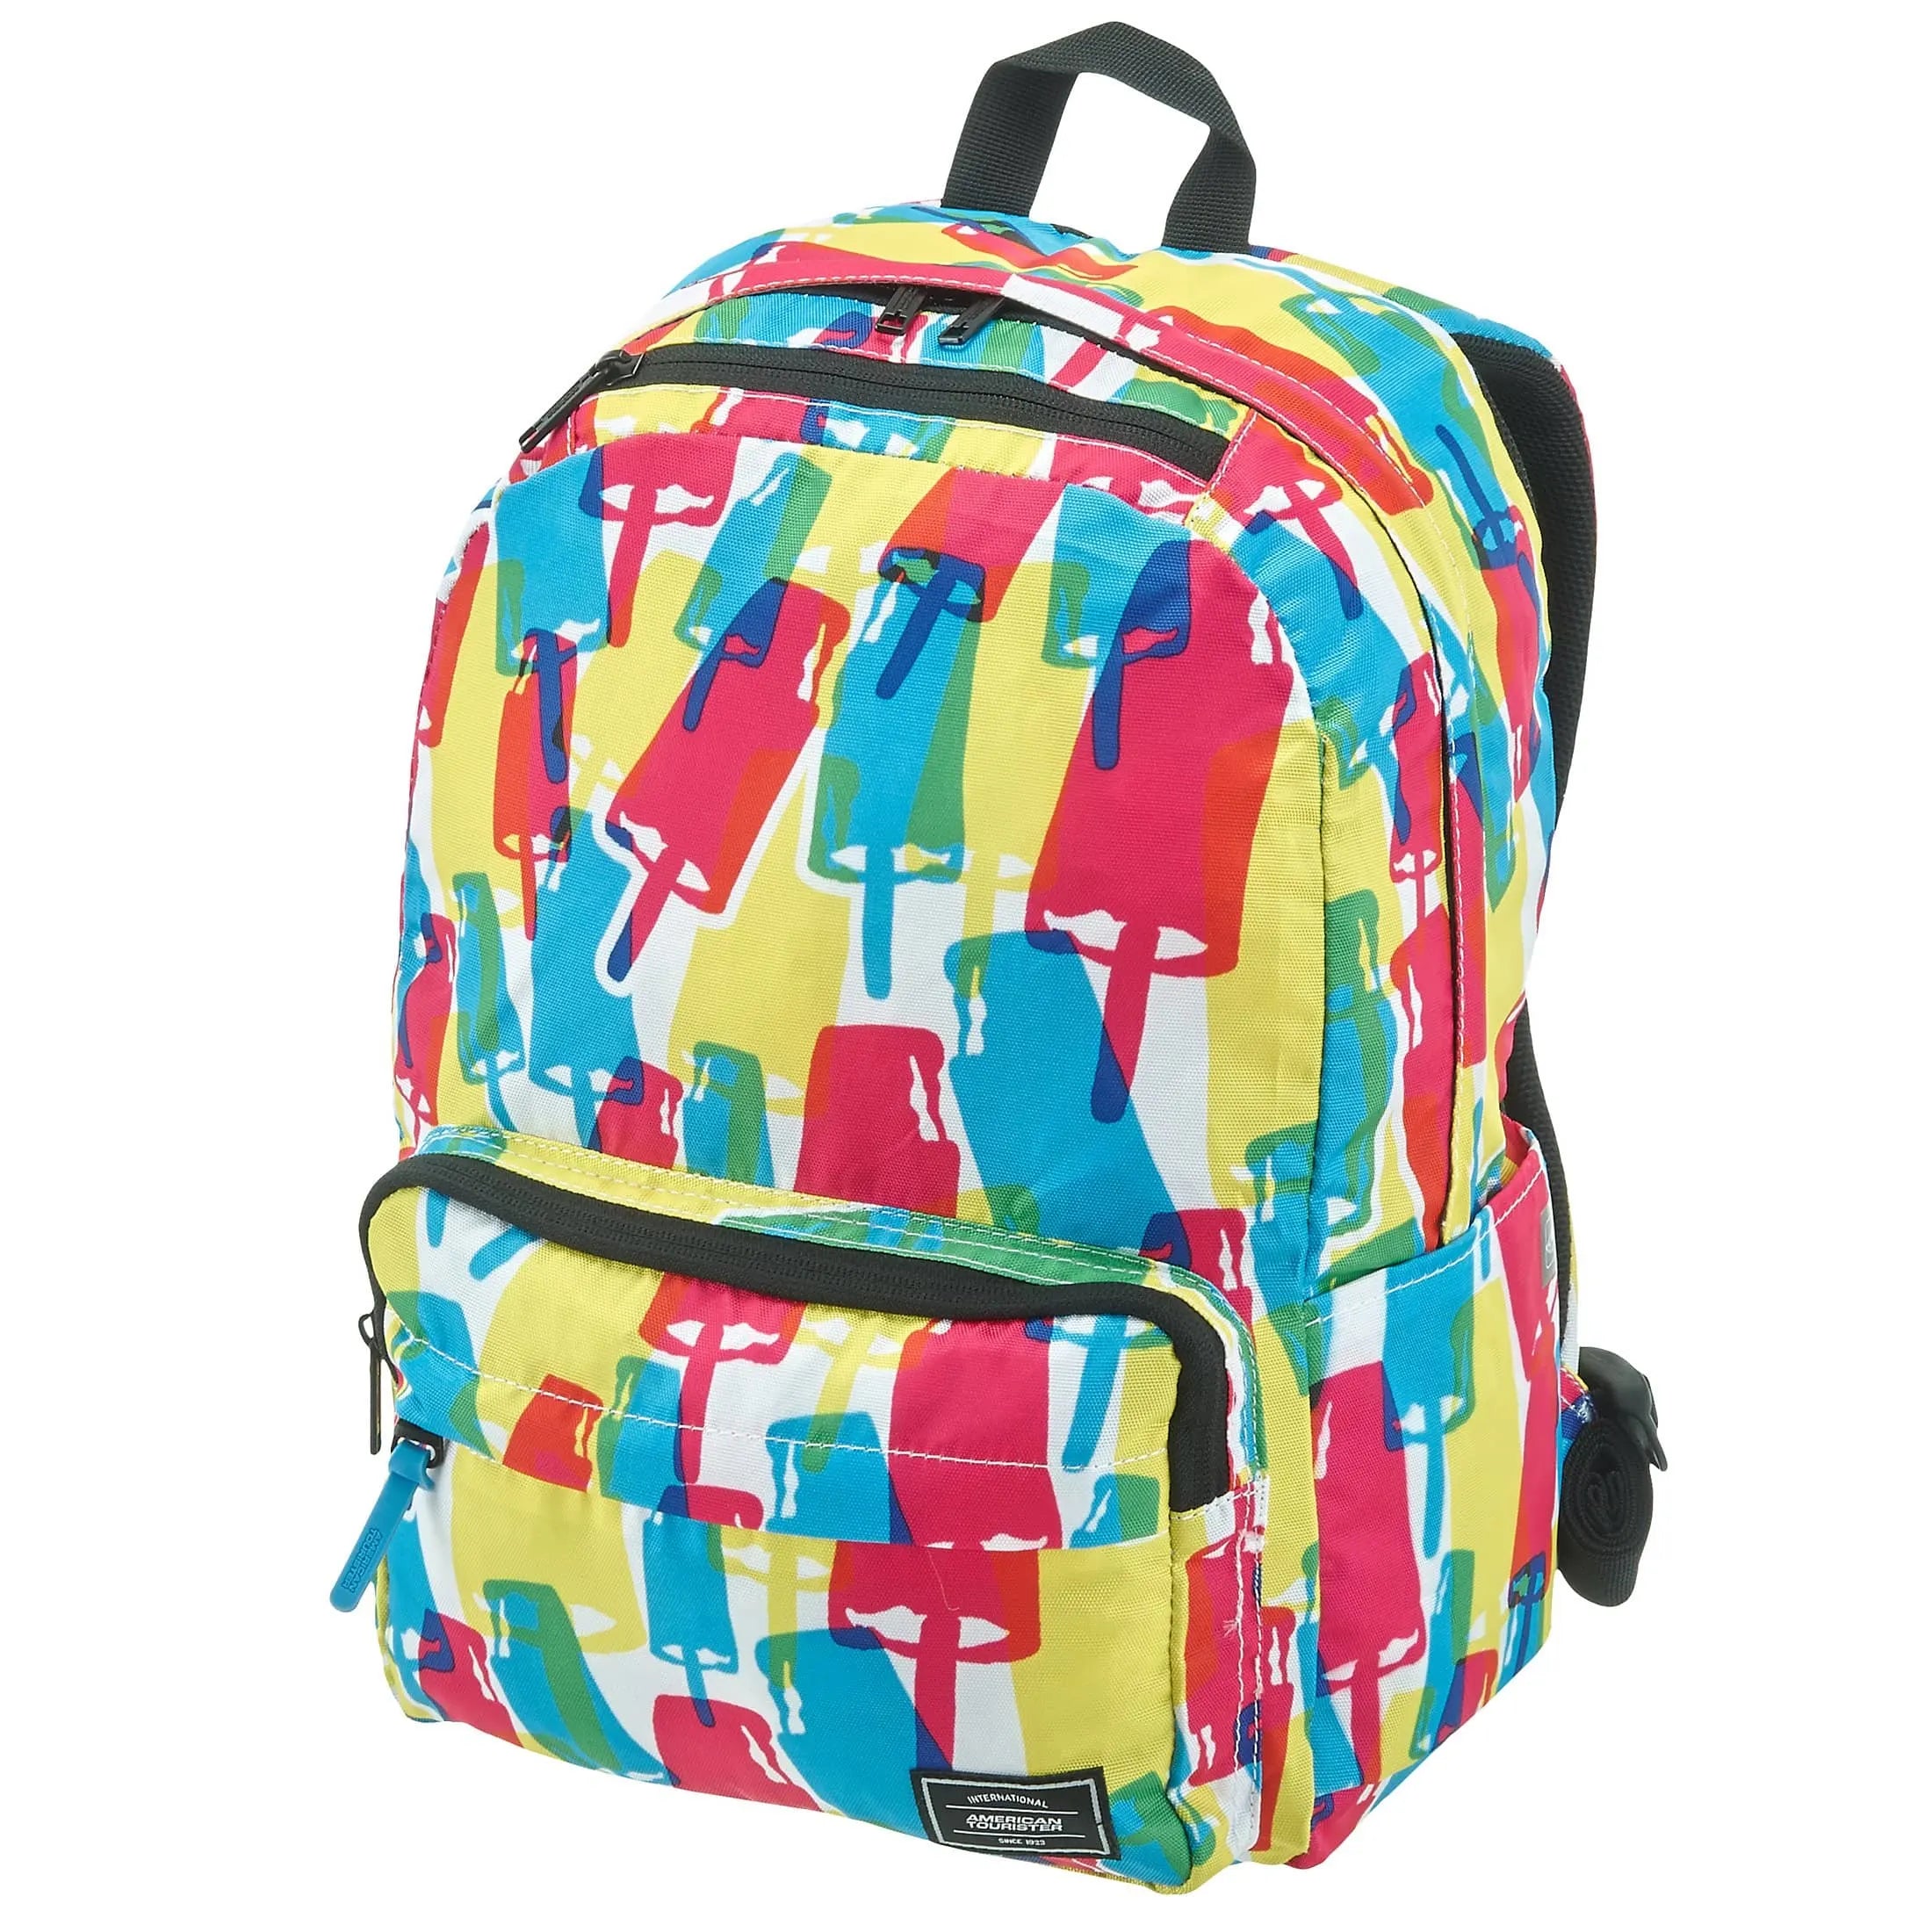 American Tourister Urban Groove Lifestyle Backpack 1 40 cm - glitch